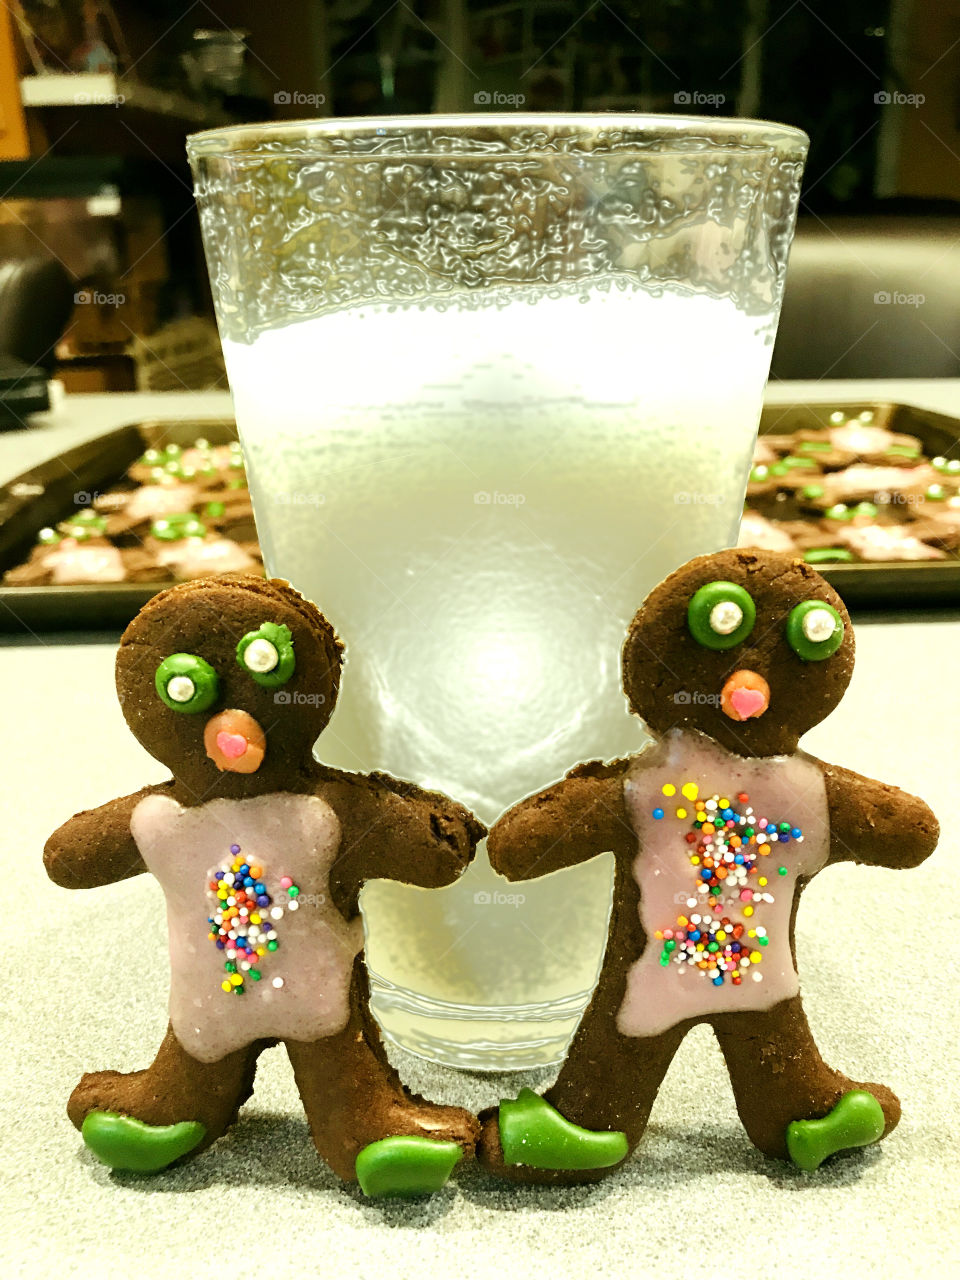 Its my darling eldest daughter’s 15 birthday today and she wanted gingerbread for her birthday. So i made homemade gingerbread babies in pink polkadot onesies with little heart shaped pacifiers! Hah! She may be growing up but she’s still my baby! 👶